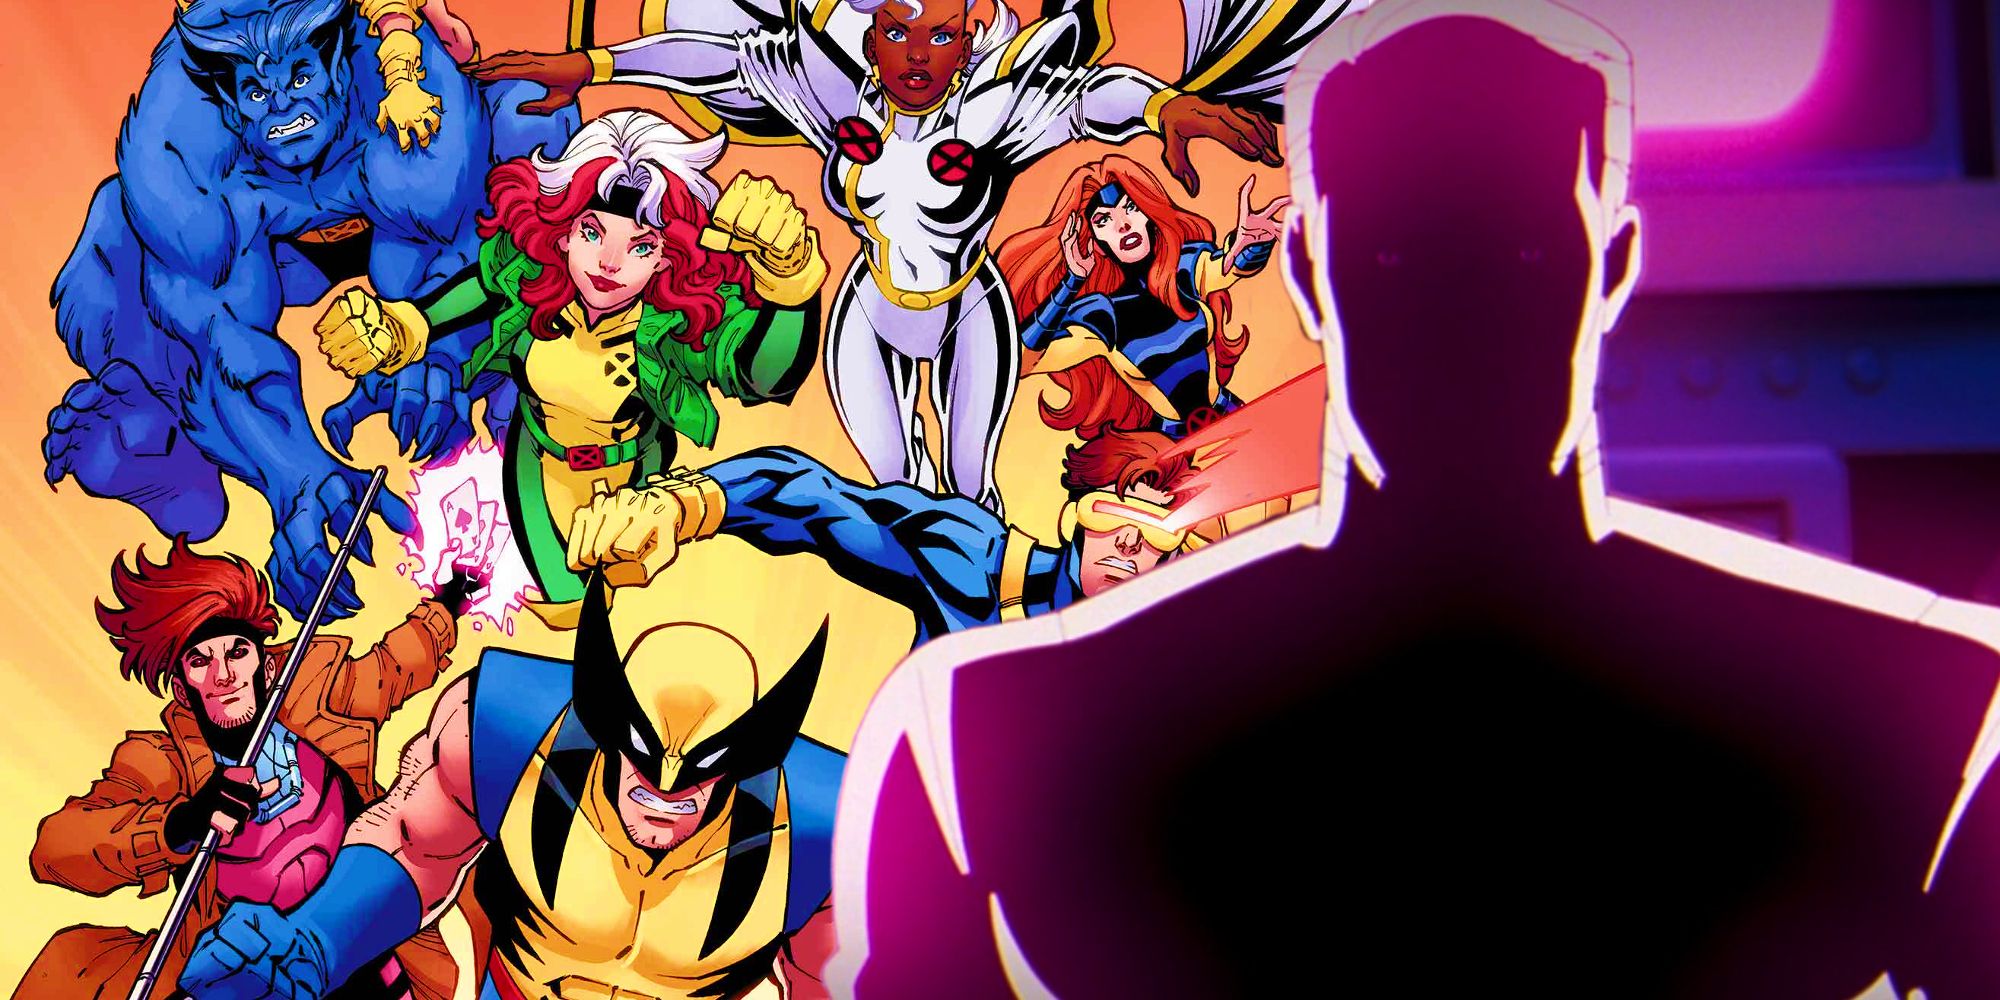 Bastion shrouded in shadows in X-Men '97 next to the main team in X-Men '97's poster